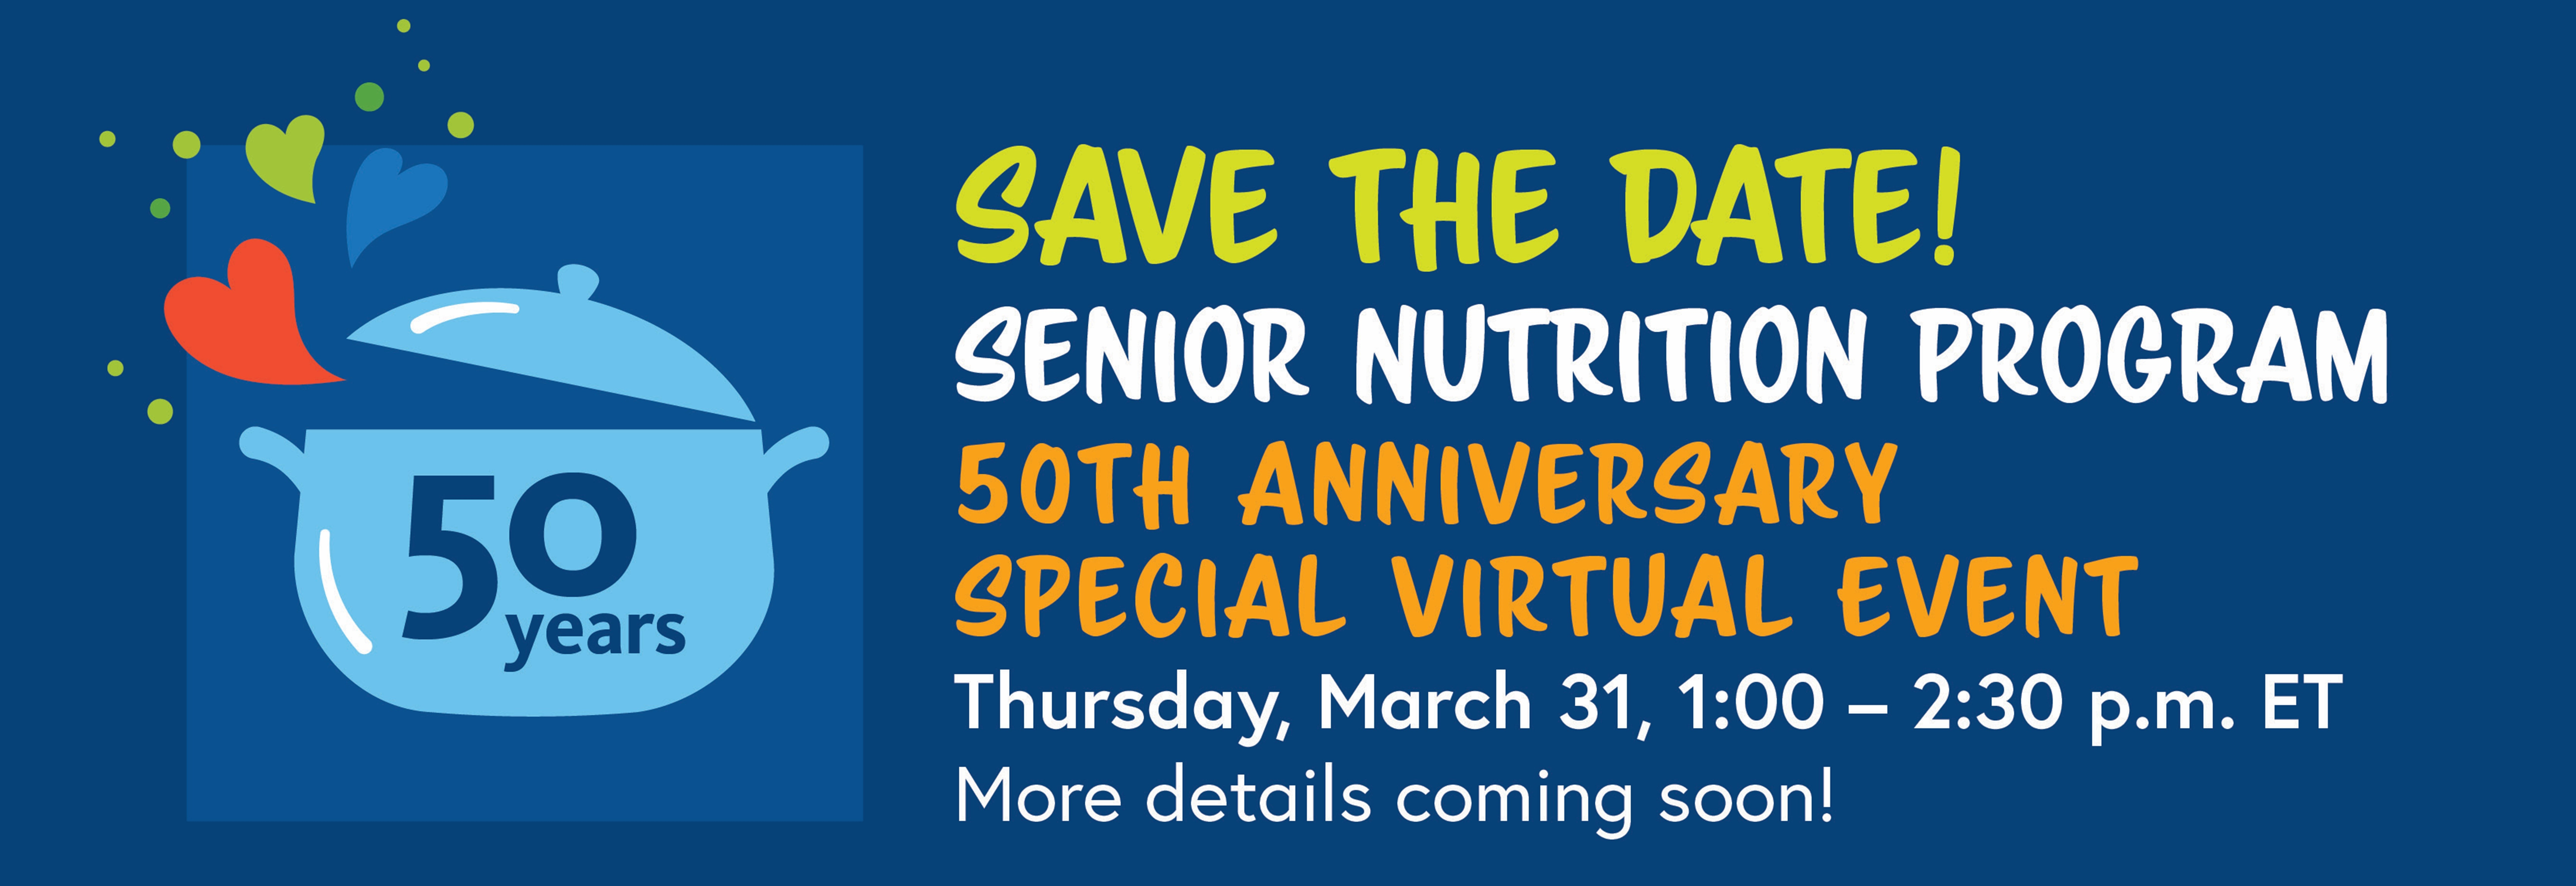 Save the date! Senior Nutrition Program 50th Anniversary Special Event. Thursday, March 31, 1:00-2:30 PM ET. More details coming soon!